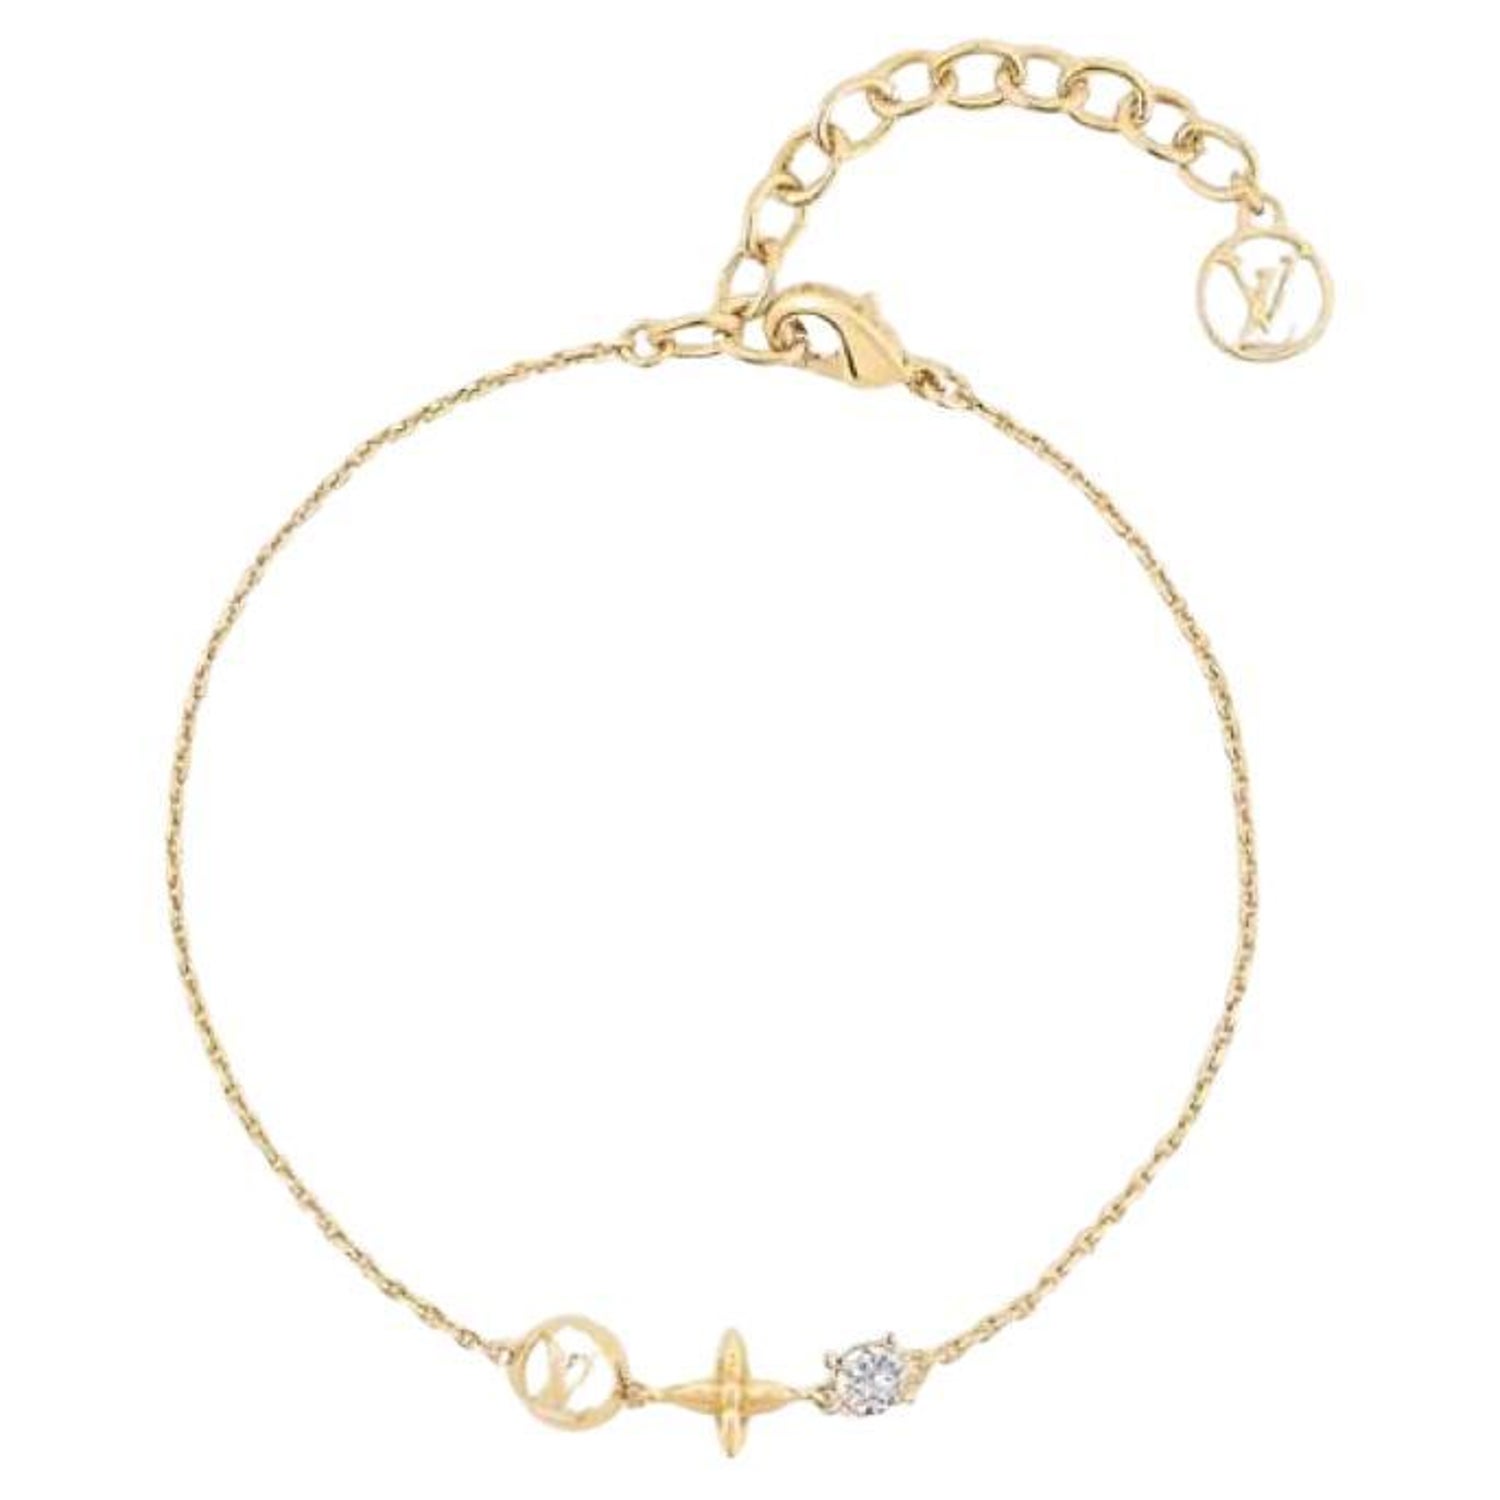 LOUIS VUITTON Forever Young Bracelet Gold Metal